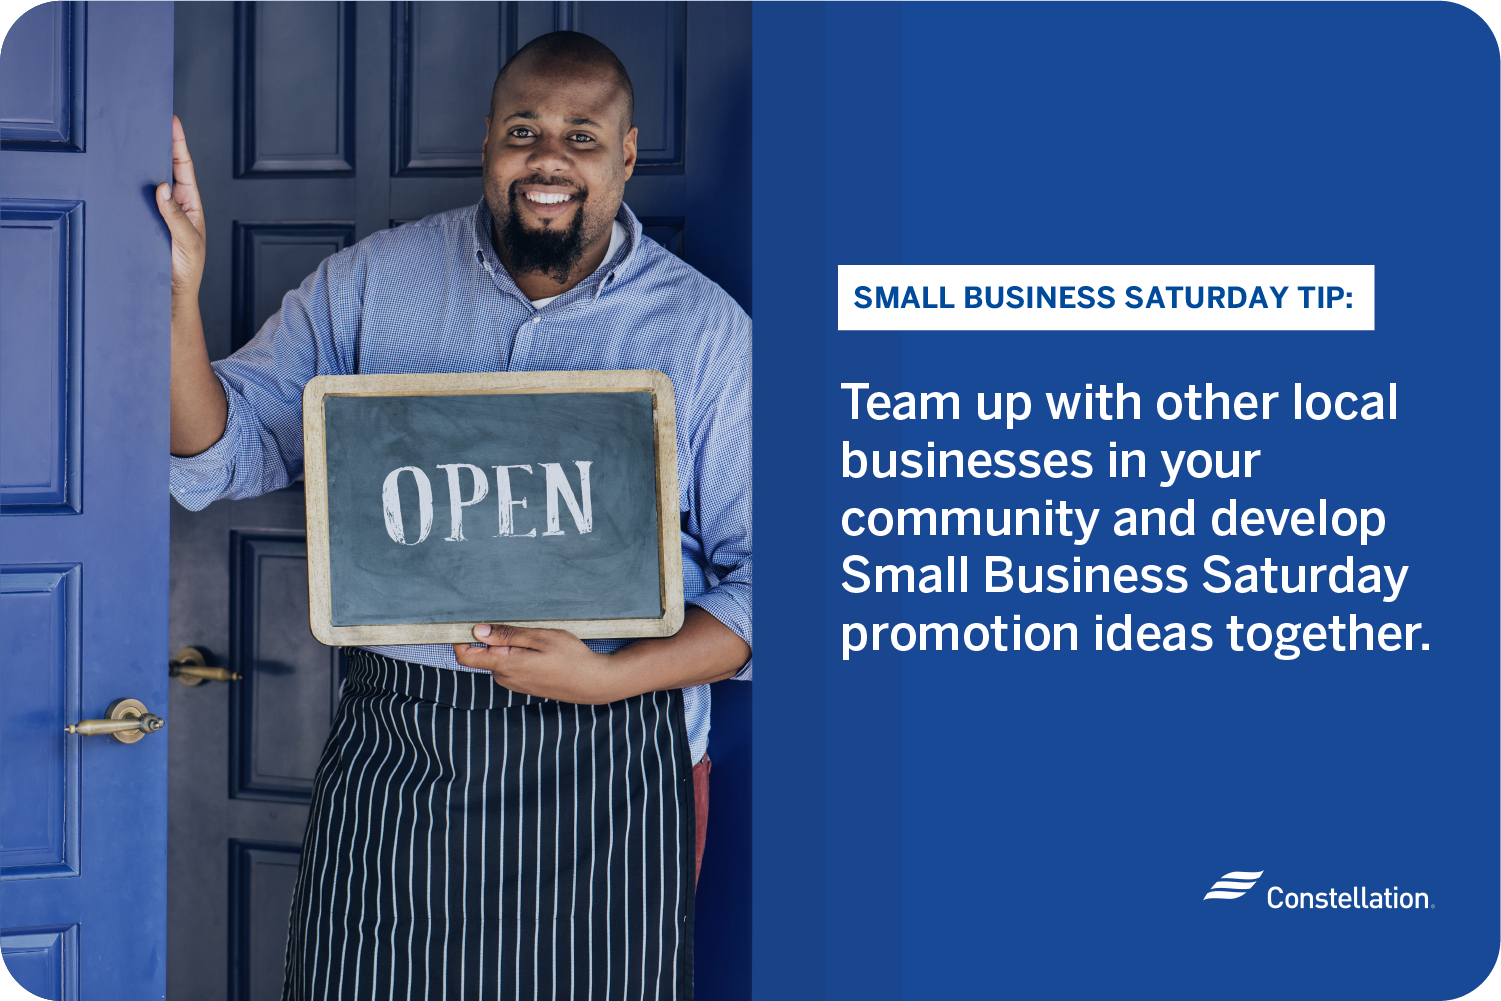 Small business saturday tip promotion idea